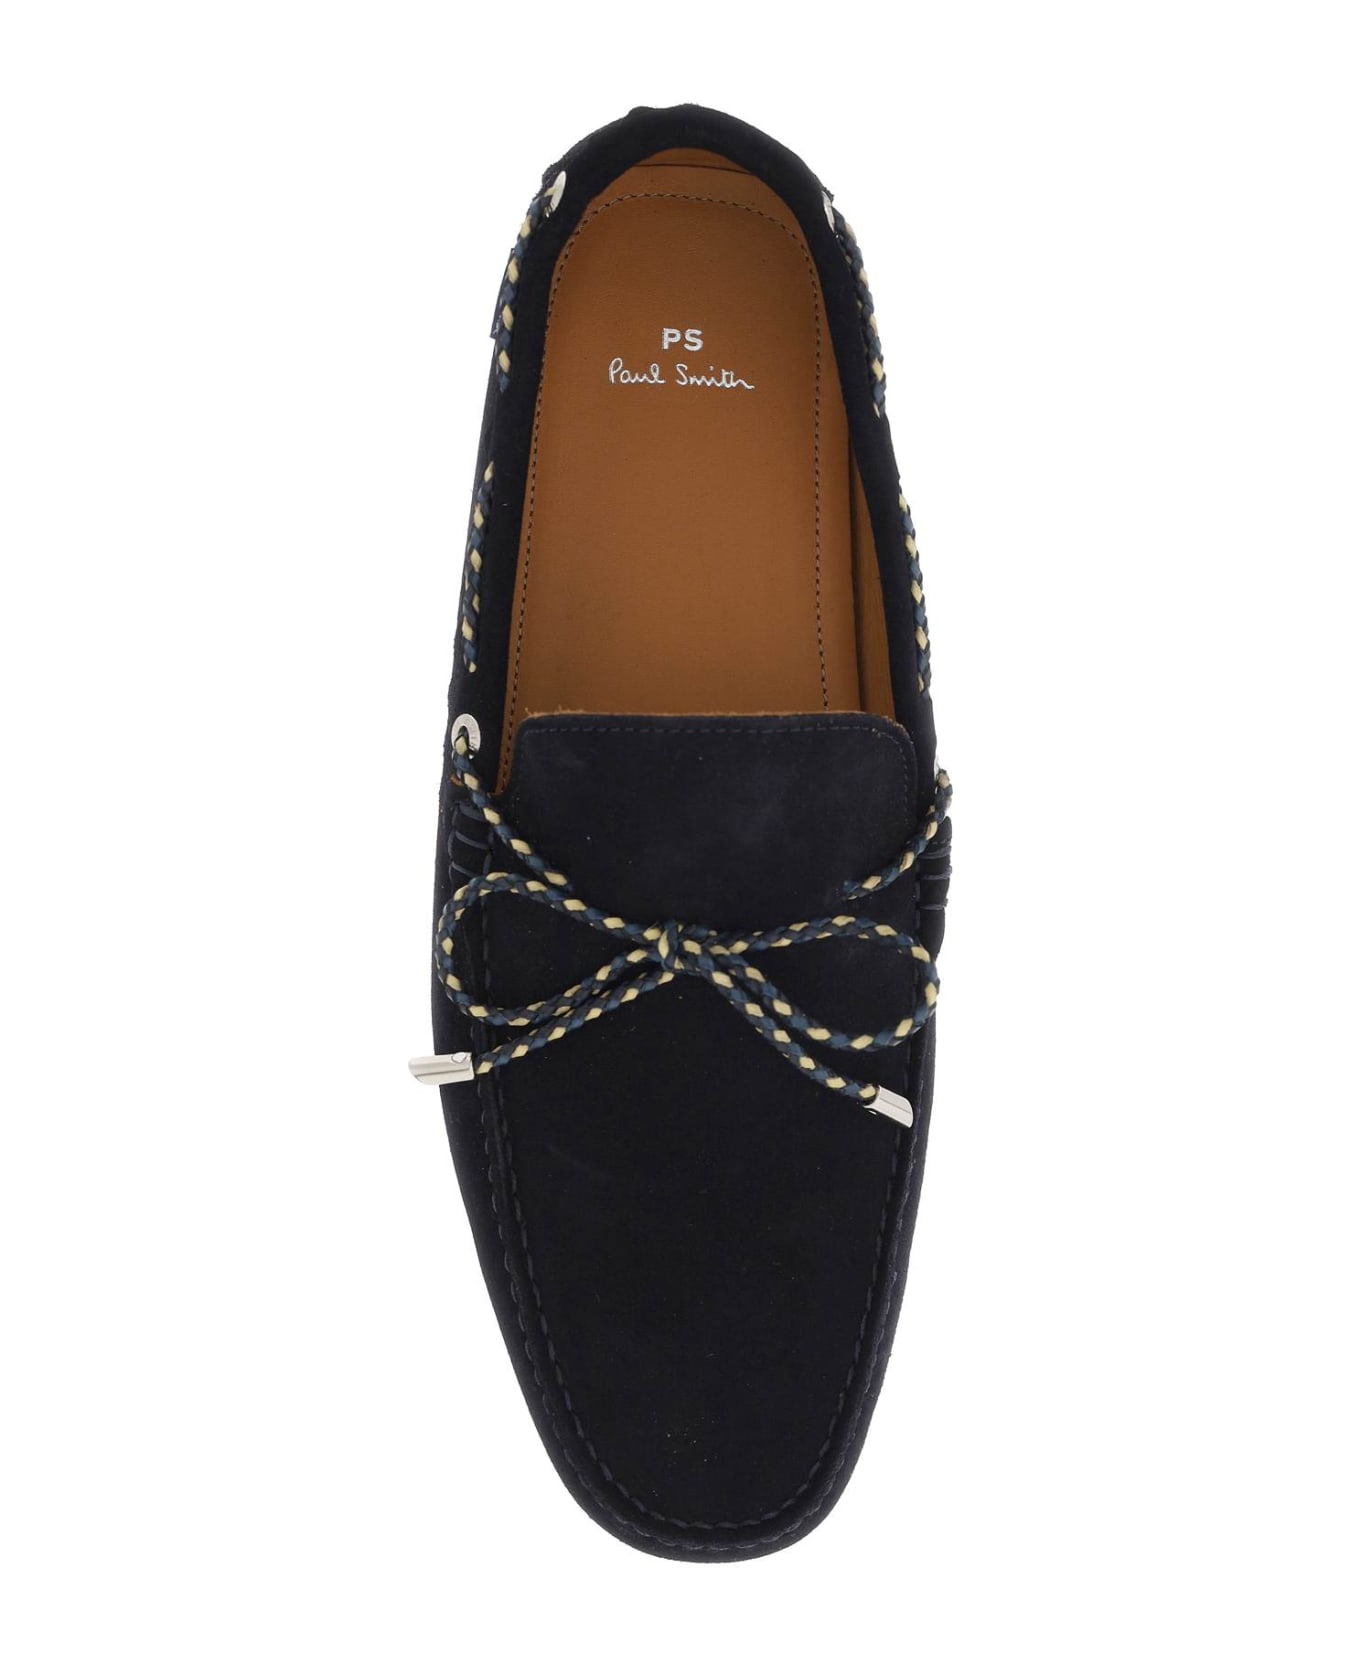 PS by Paul Smith 'springfield' Suede Moccasin - BLUE